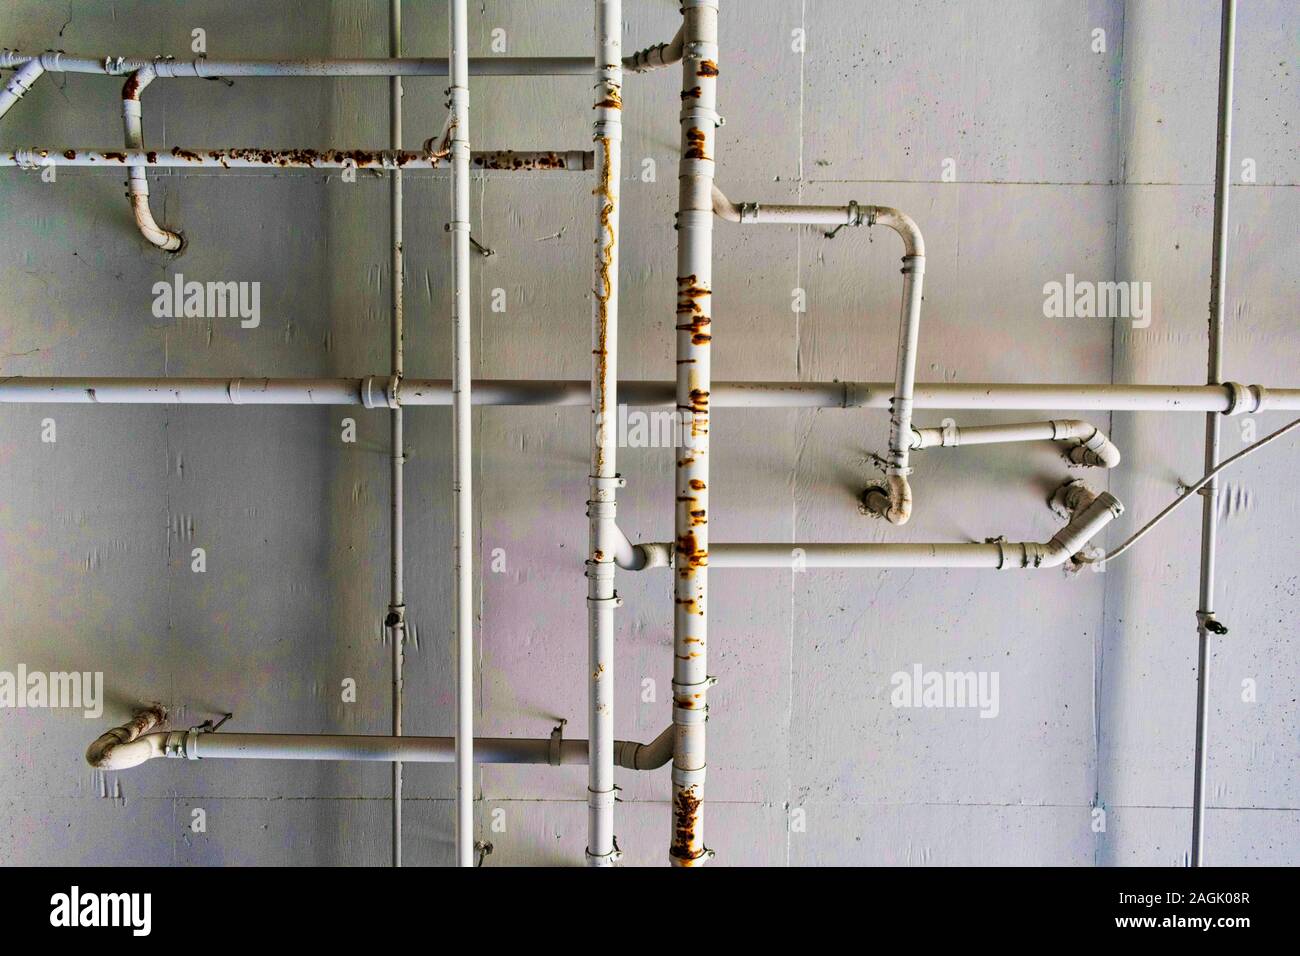 Metal Plumbing System And Water Pipes On Cement Ceiling